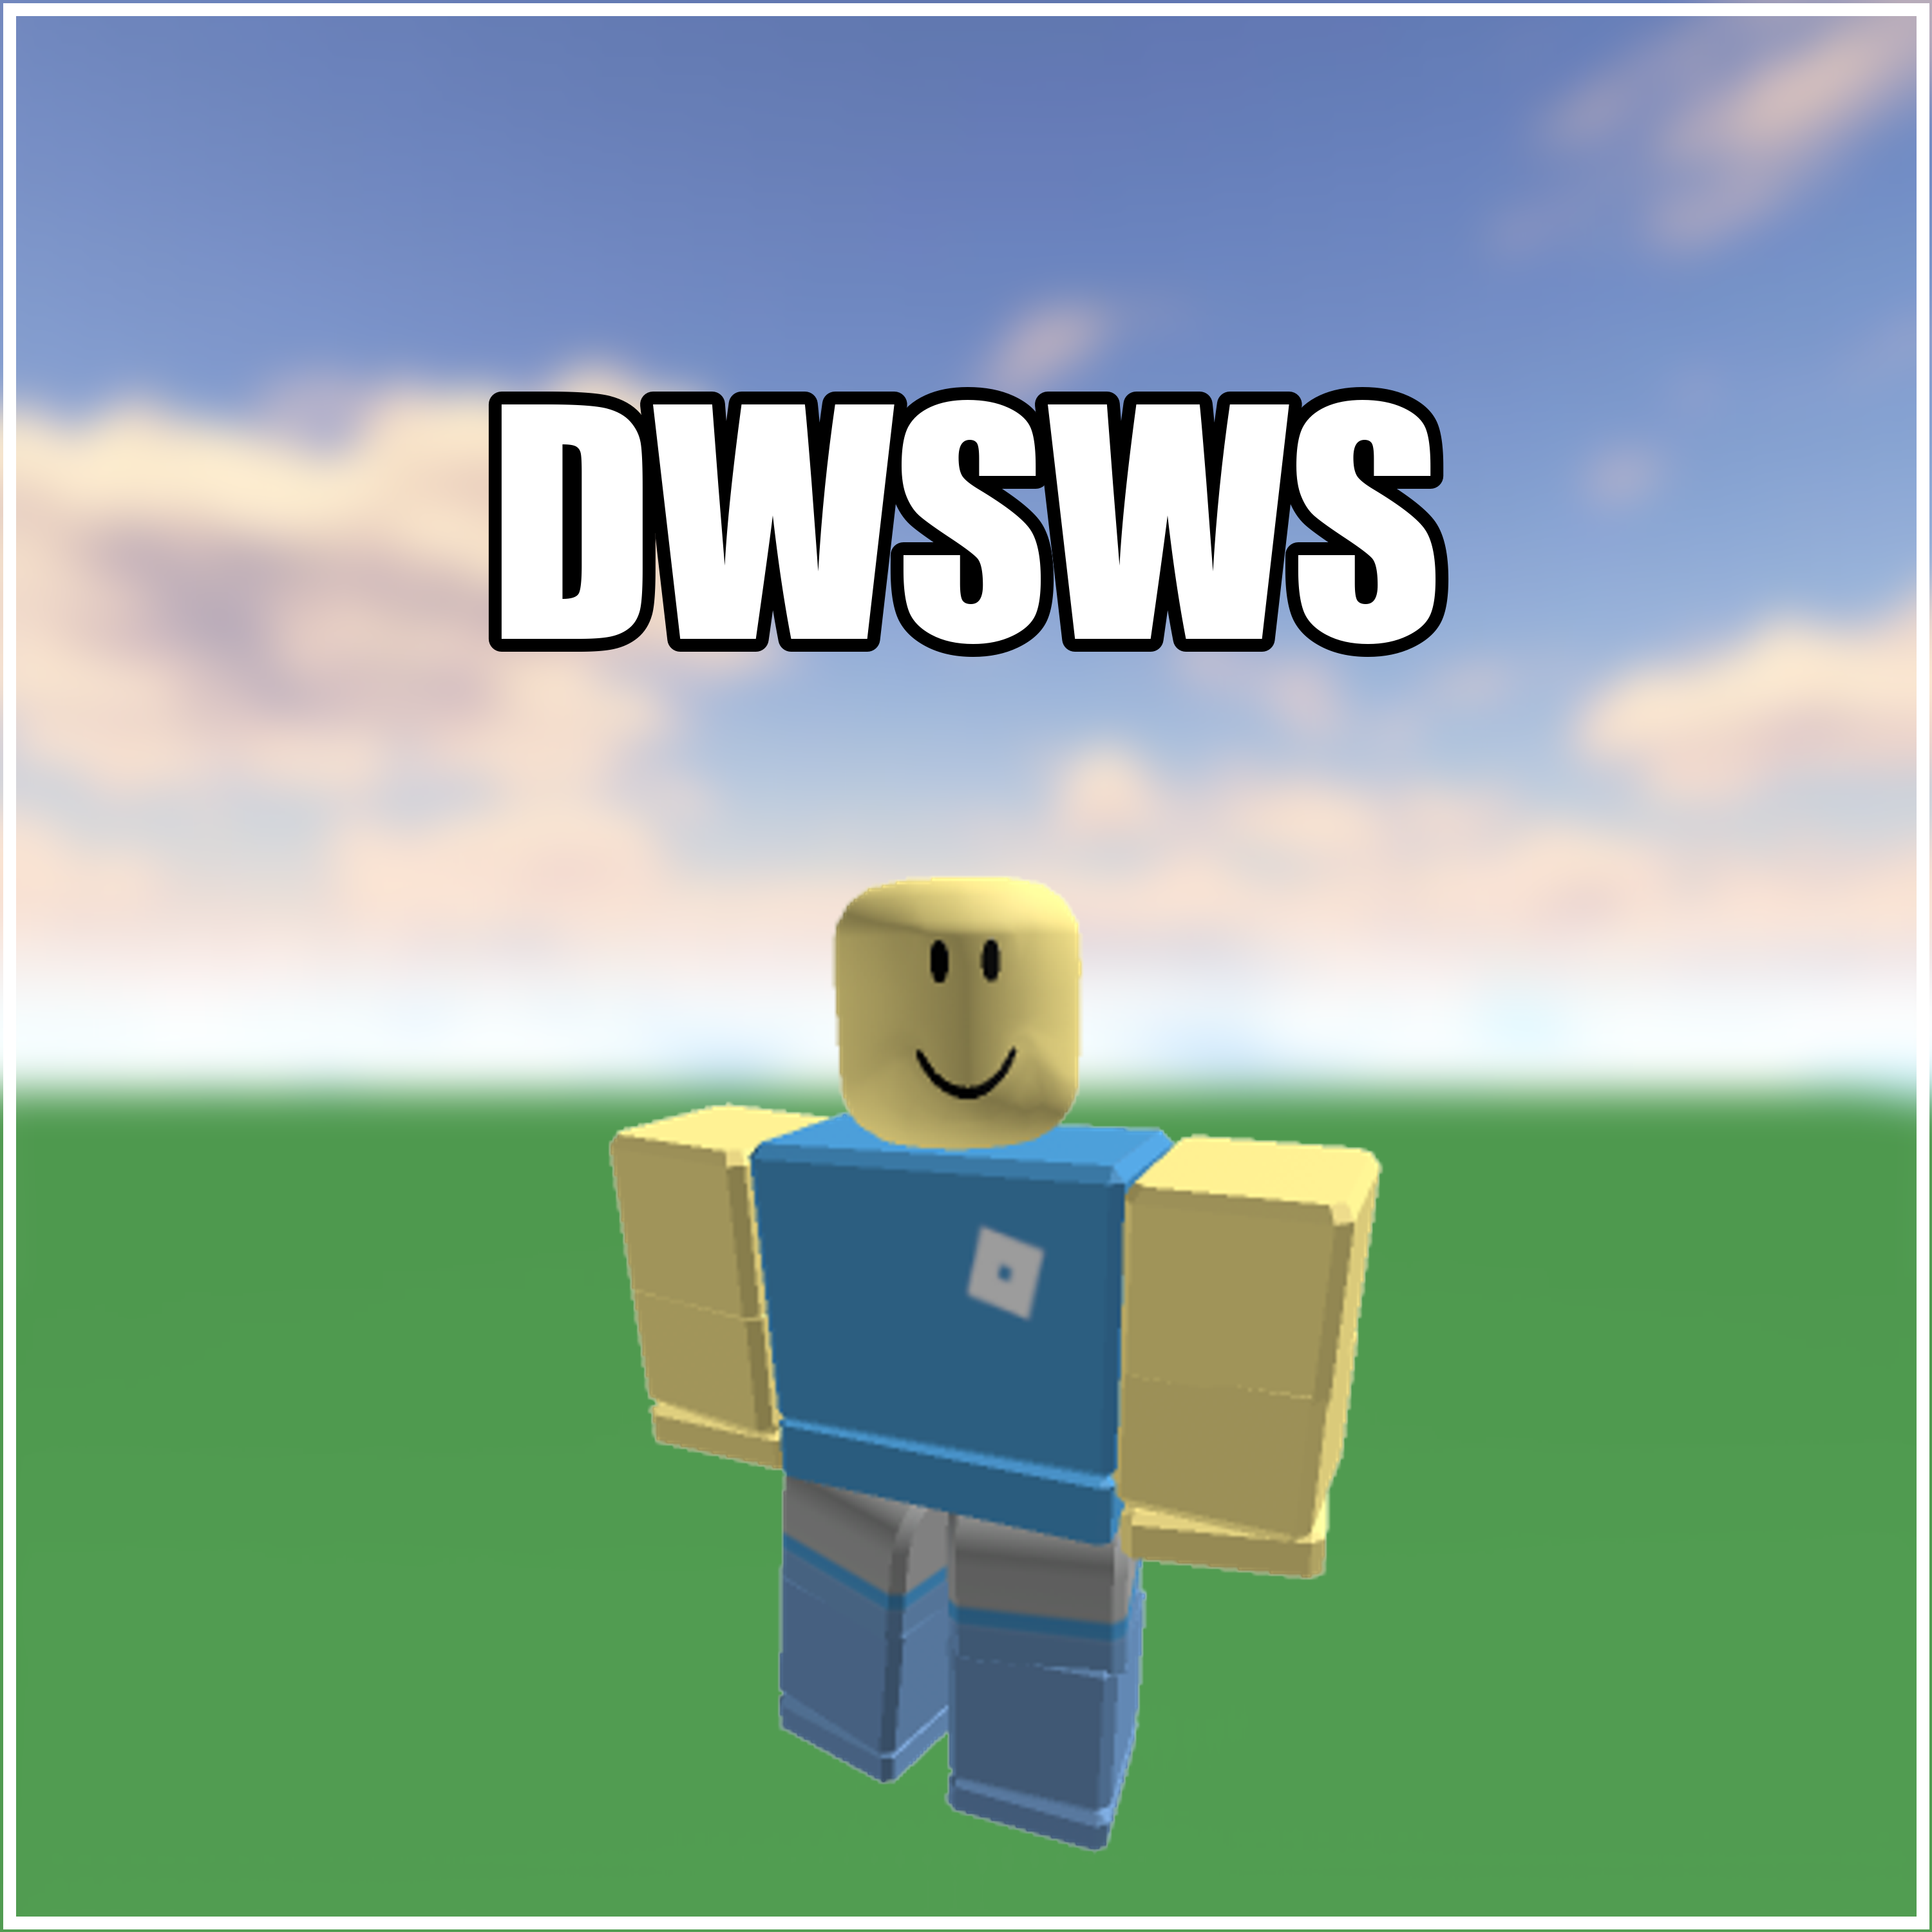 robruh RARE username "DWSWS" ROBLOX account guaranteed to be unverified!